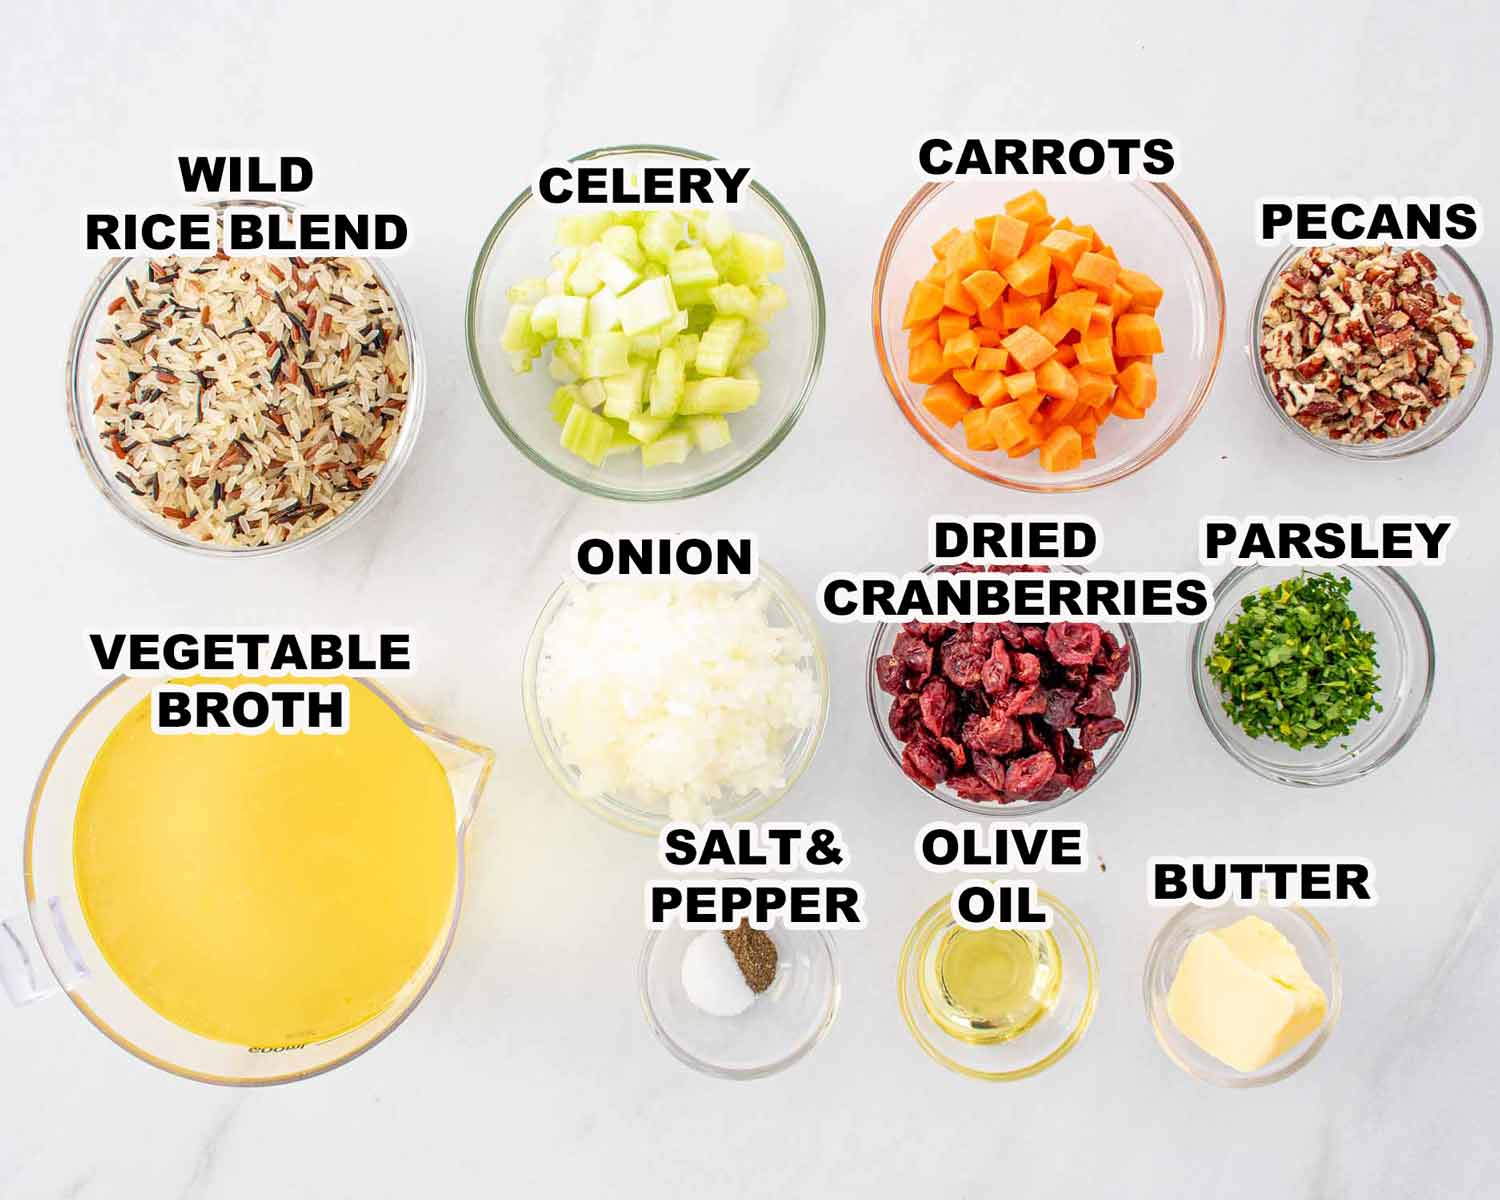 ingredients needed to make wild rice pilaf.